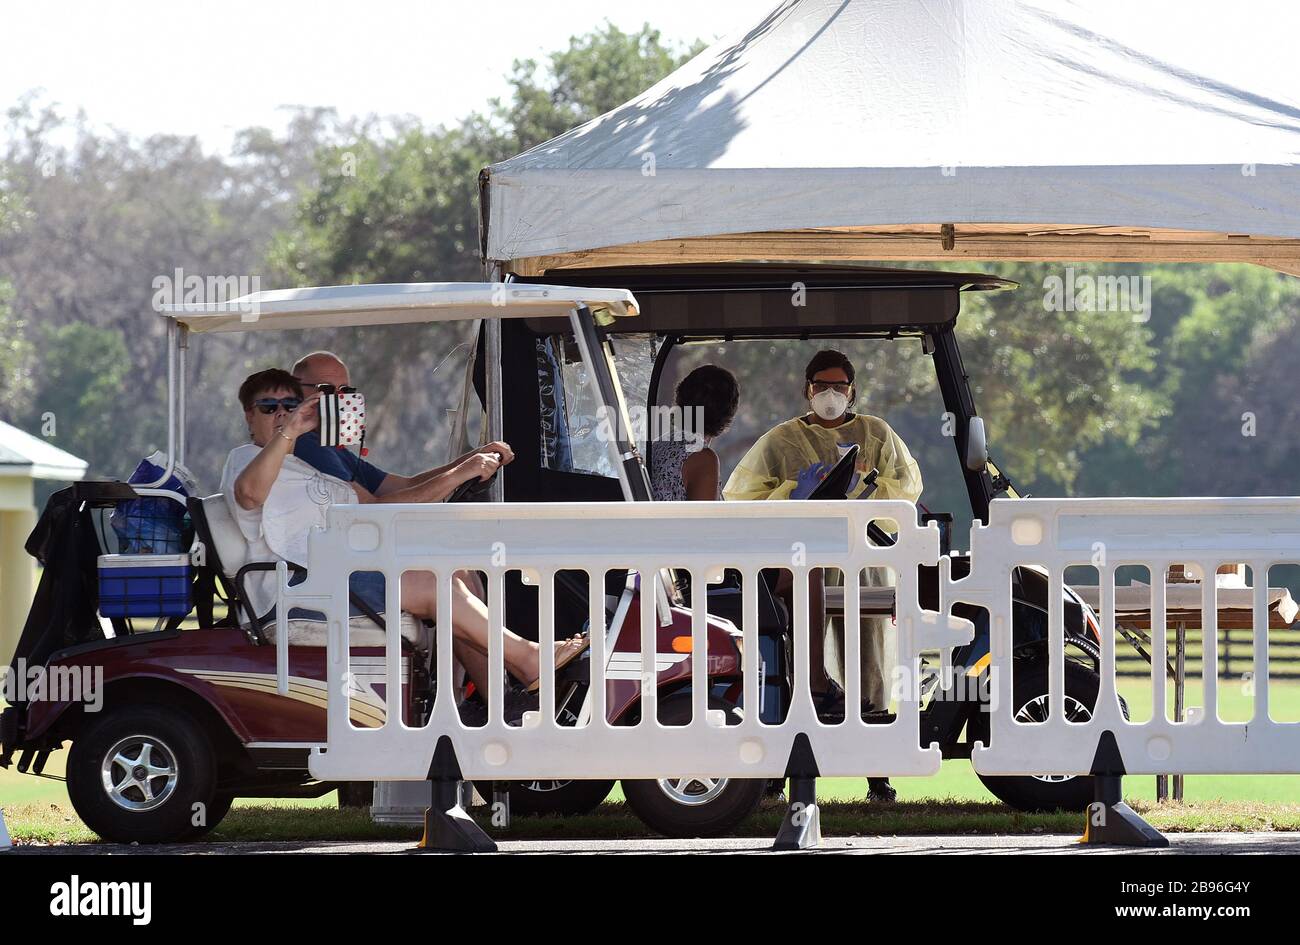 The Villages, Florida, USA. March 23, 2020 - The Villages, Florida, United States - People arrive in golf carts to be tested for the coronavirus on March 23, 2020 at a COVID-19 mobile testing site at The Villages Polo Club in The Villages, Florida. Health workers in this retirement community will operate the testing site for five days. (Paul Hennessy/Alamy) Credit: Paul Hennessy/Alamy Live News Stock Photo